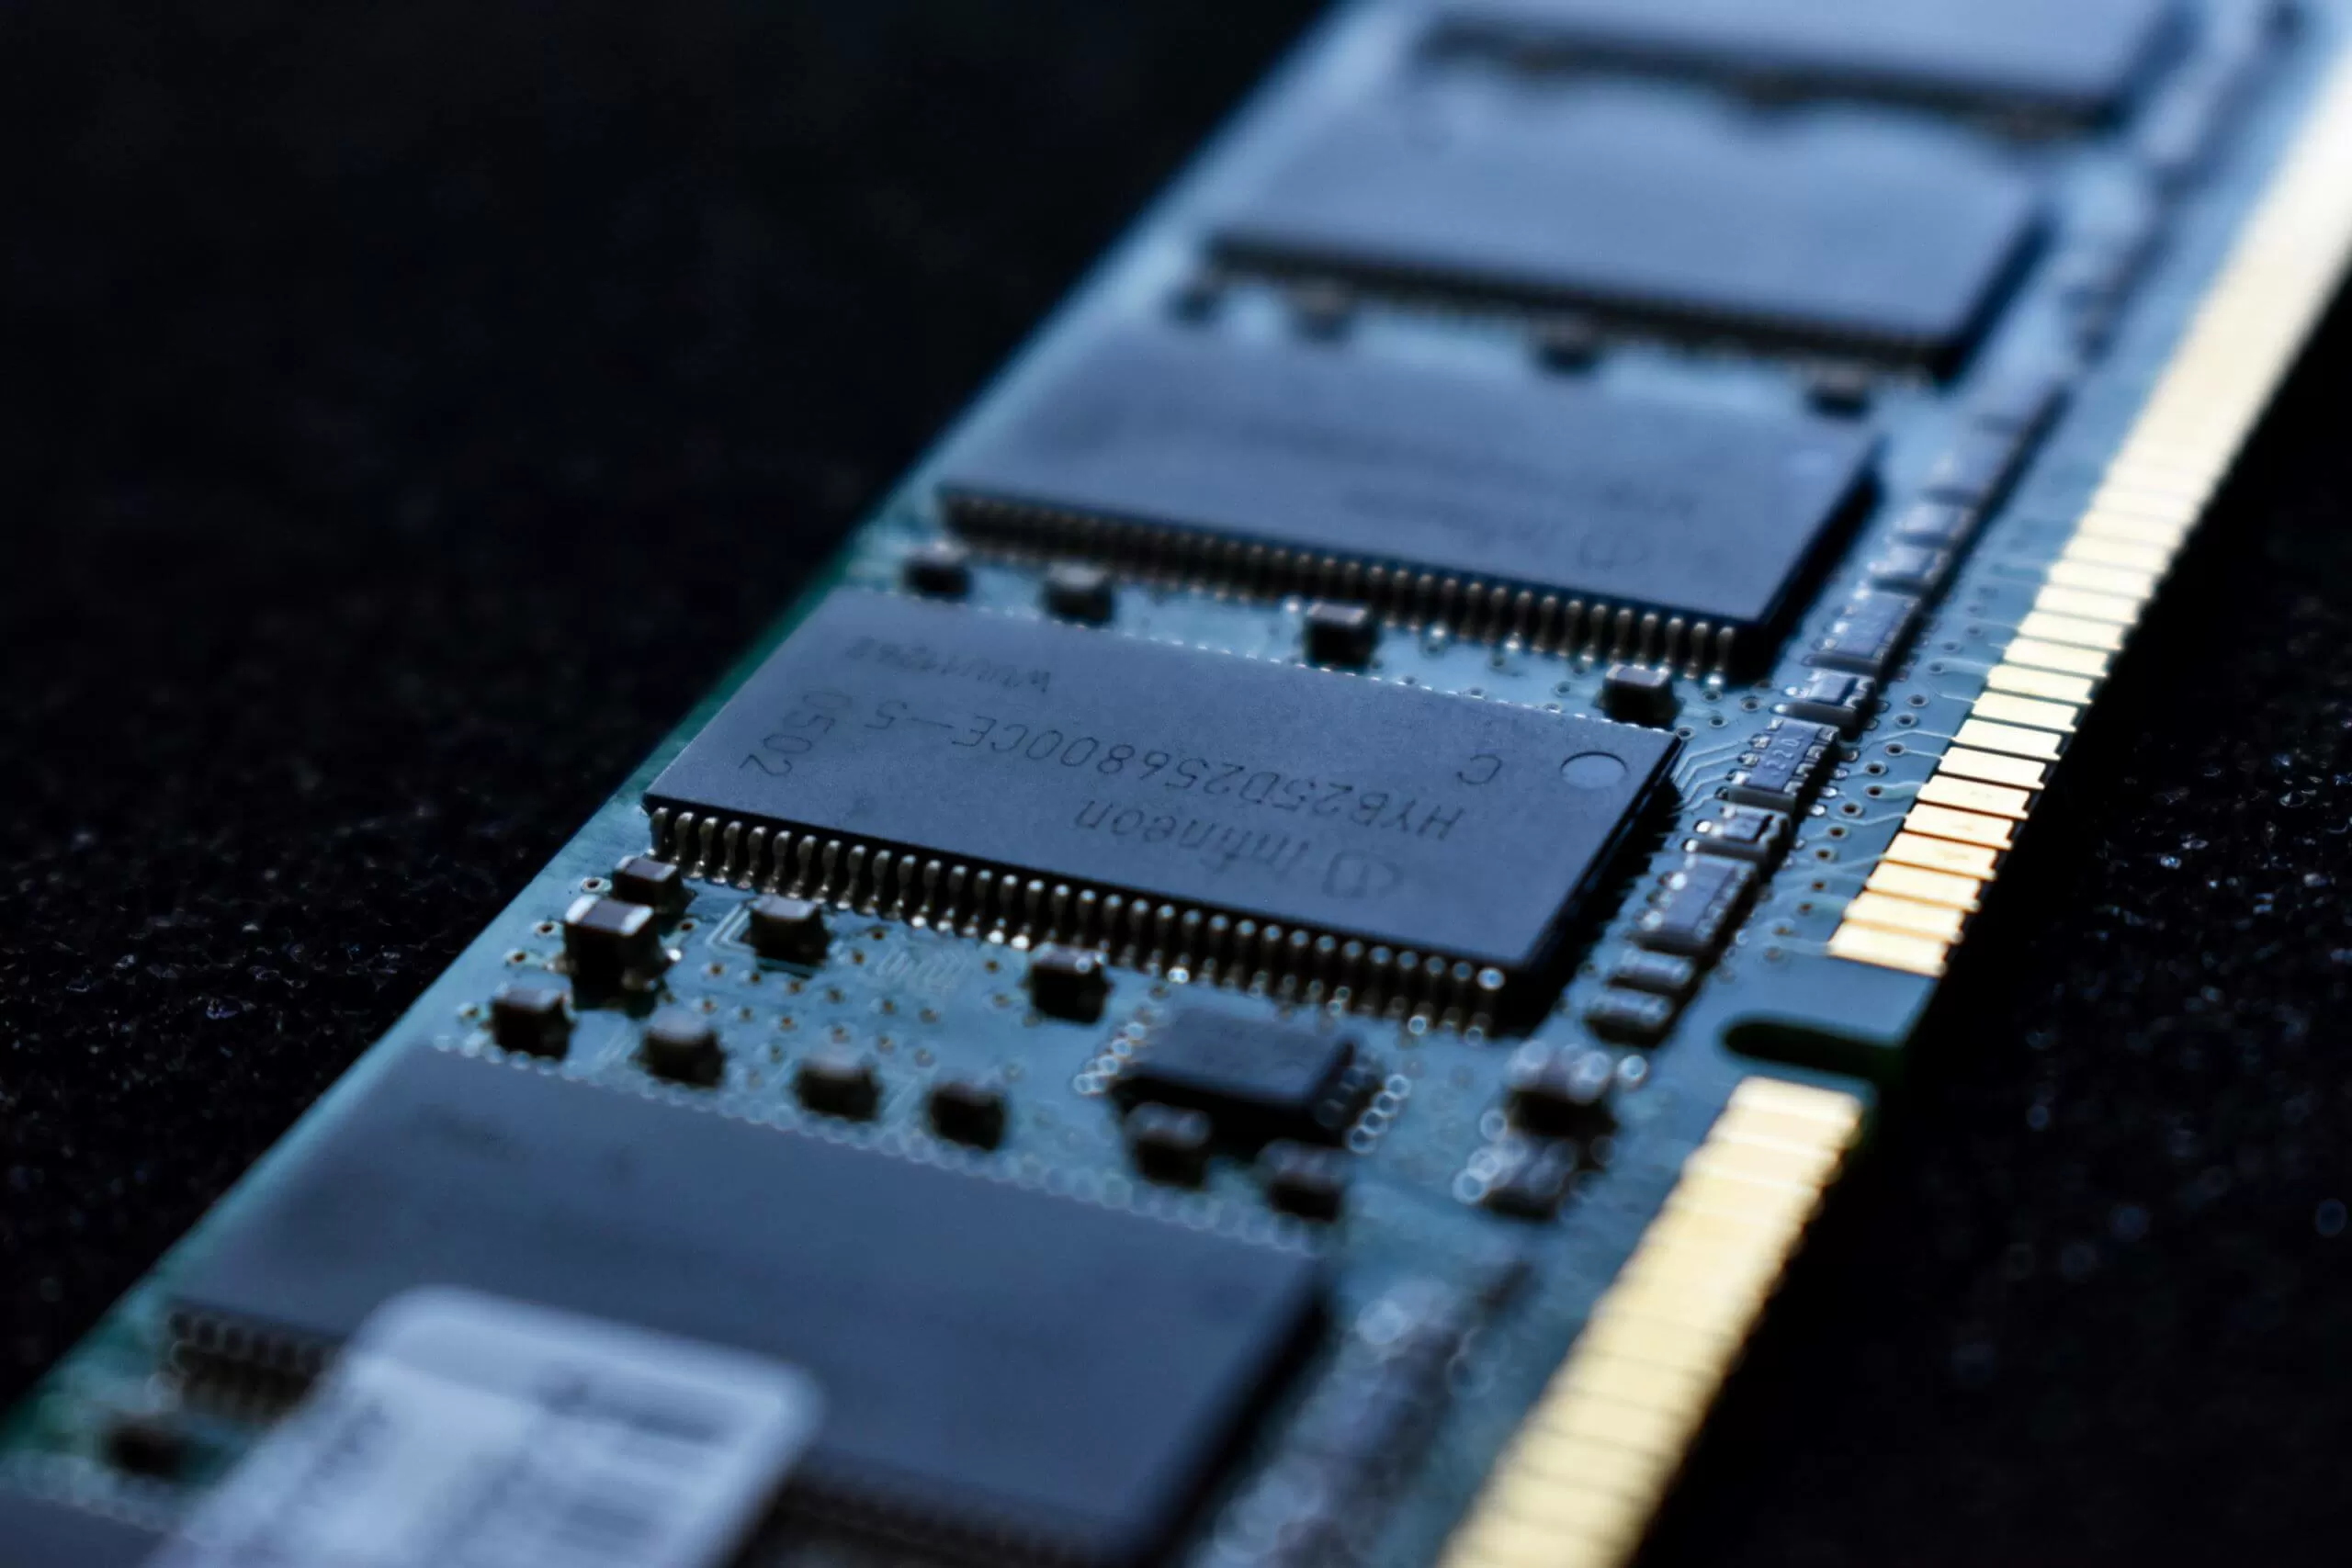 SK Hynix is getting ready to make DDR5-8400 memory